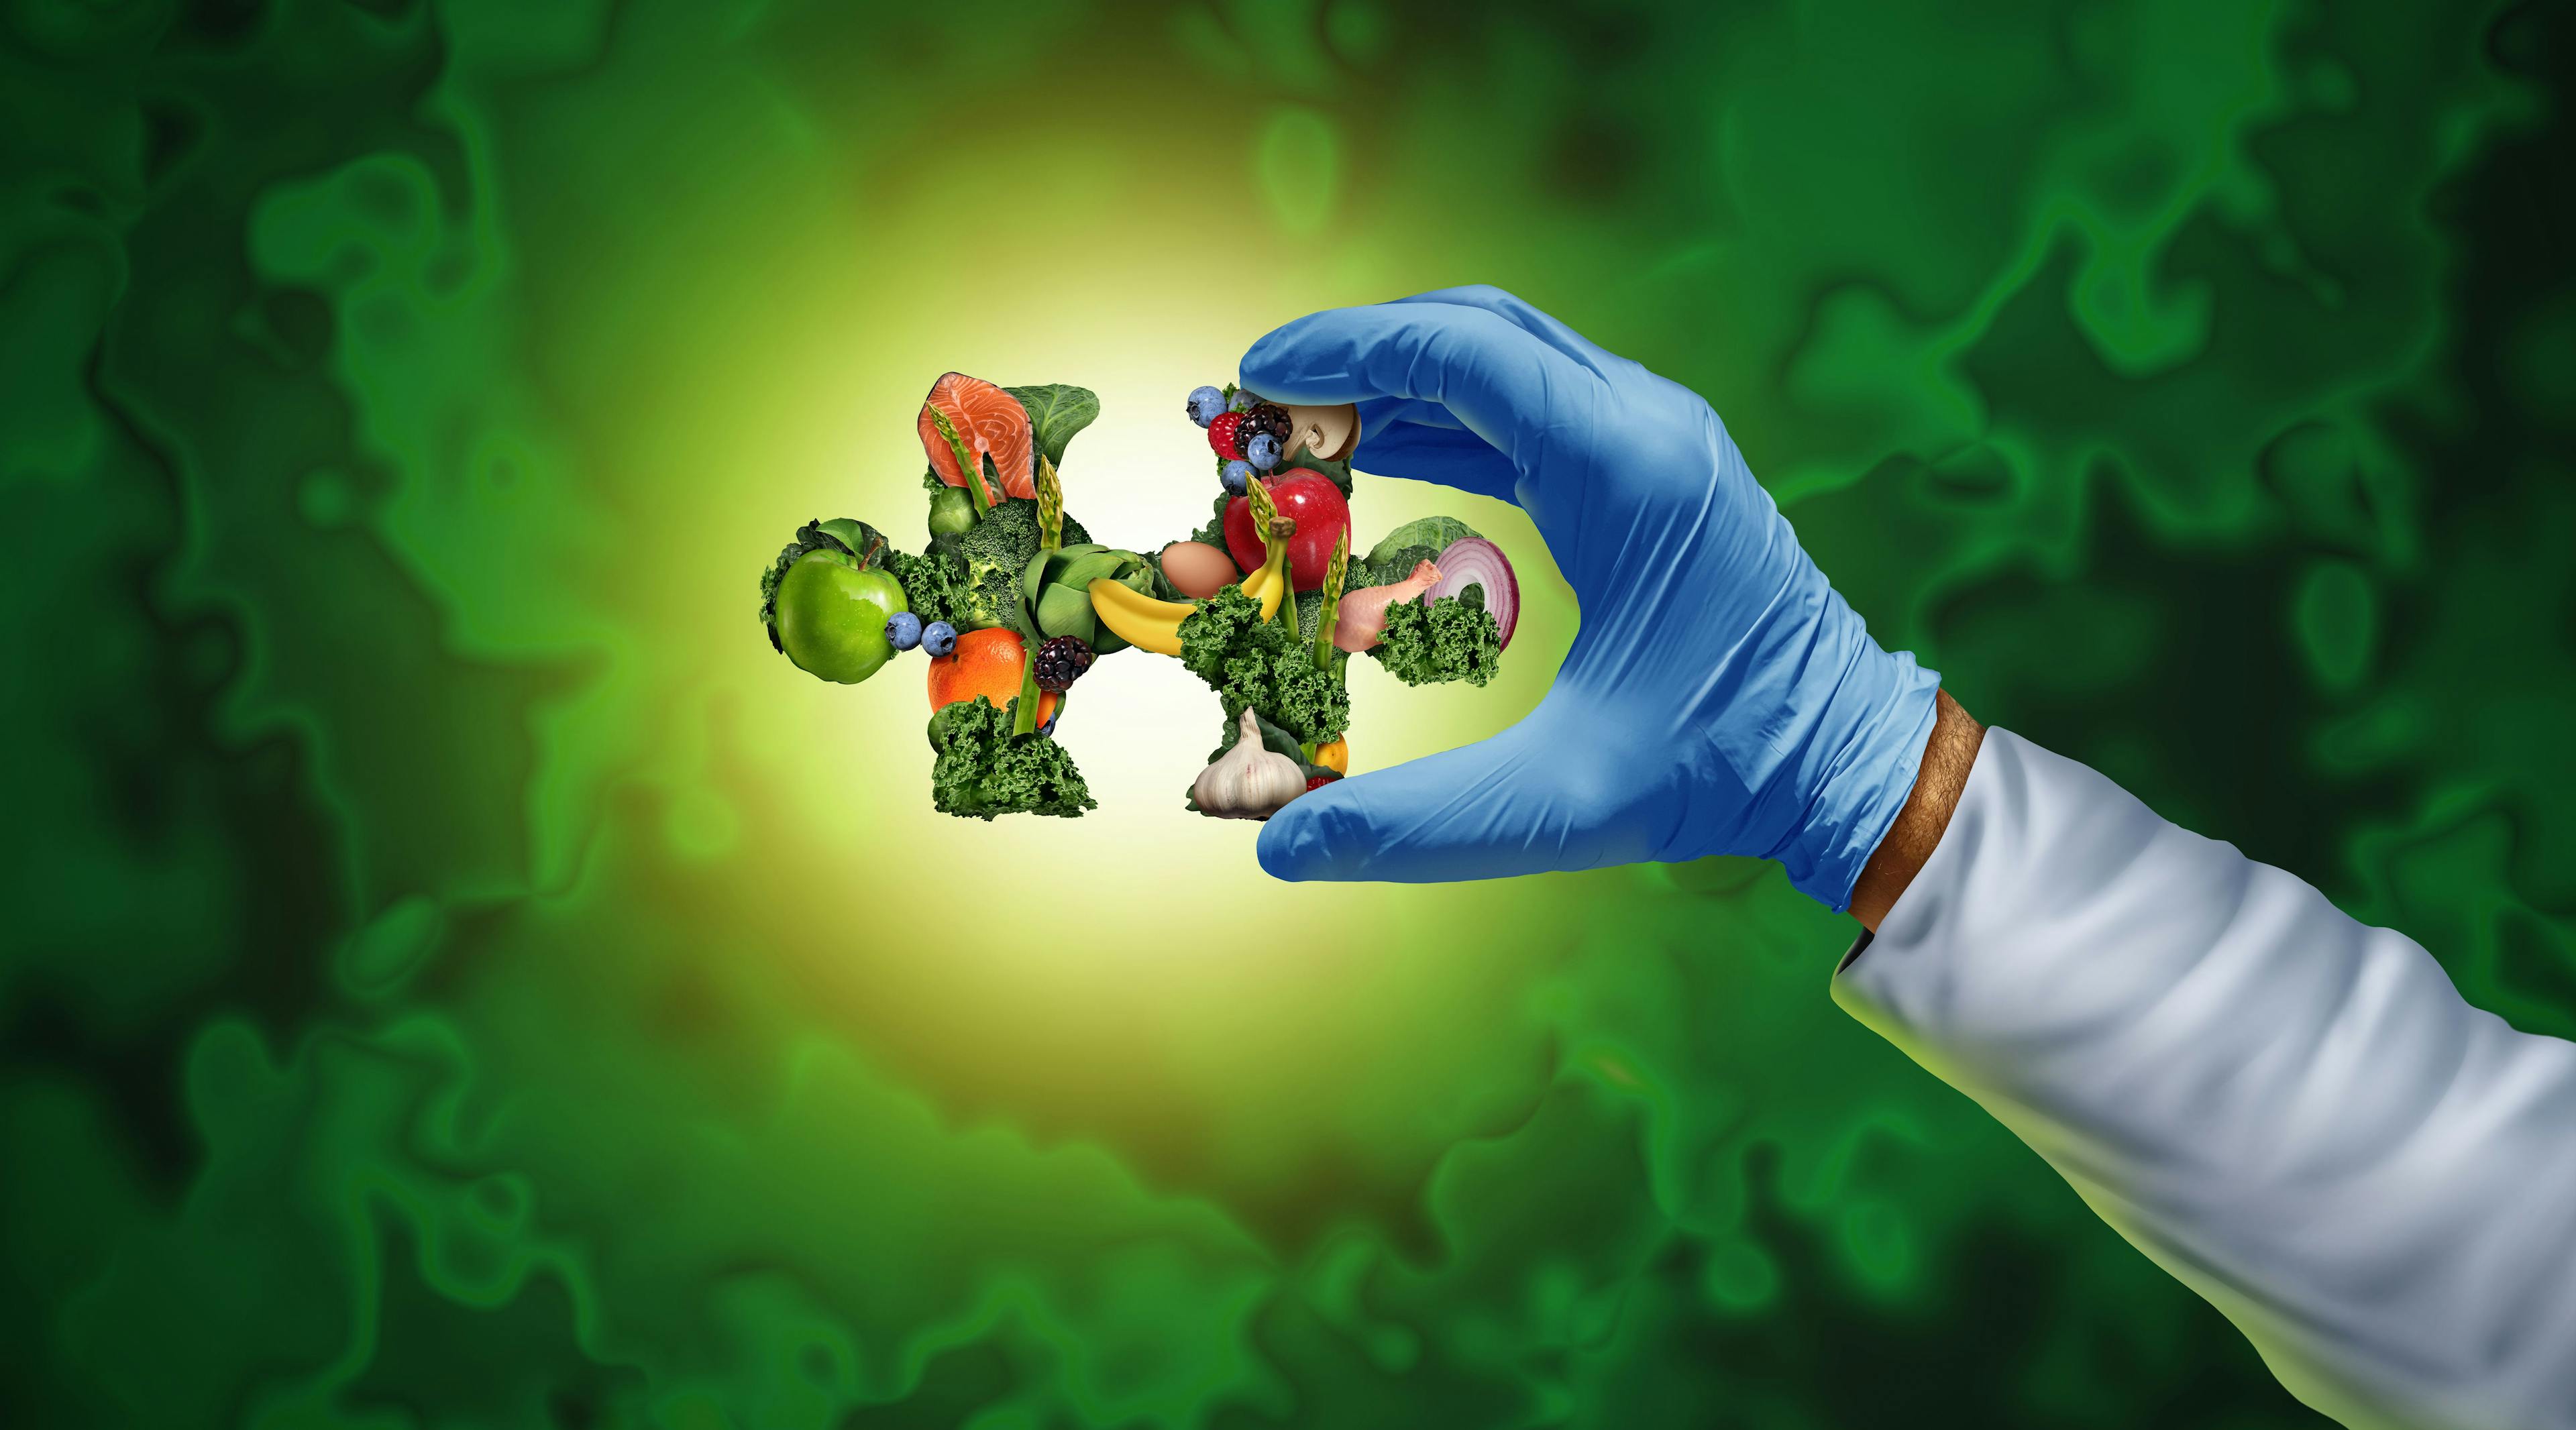 Nutrition science and food science | Image credit: freshidea - stock.adobe.com